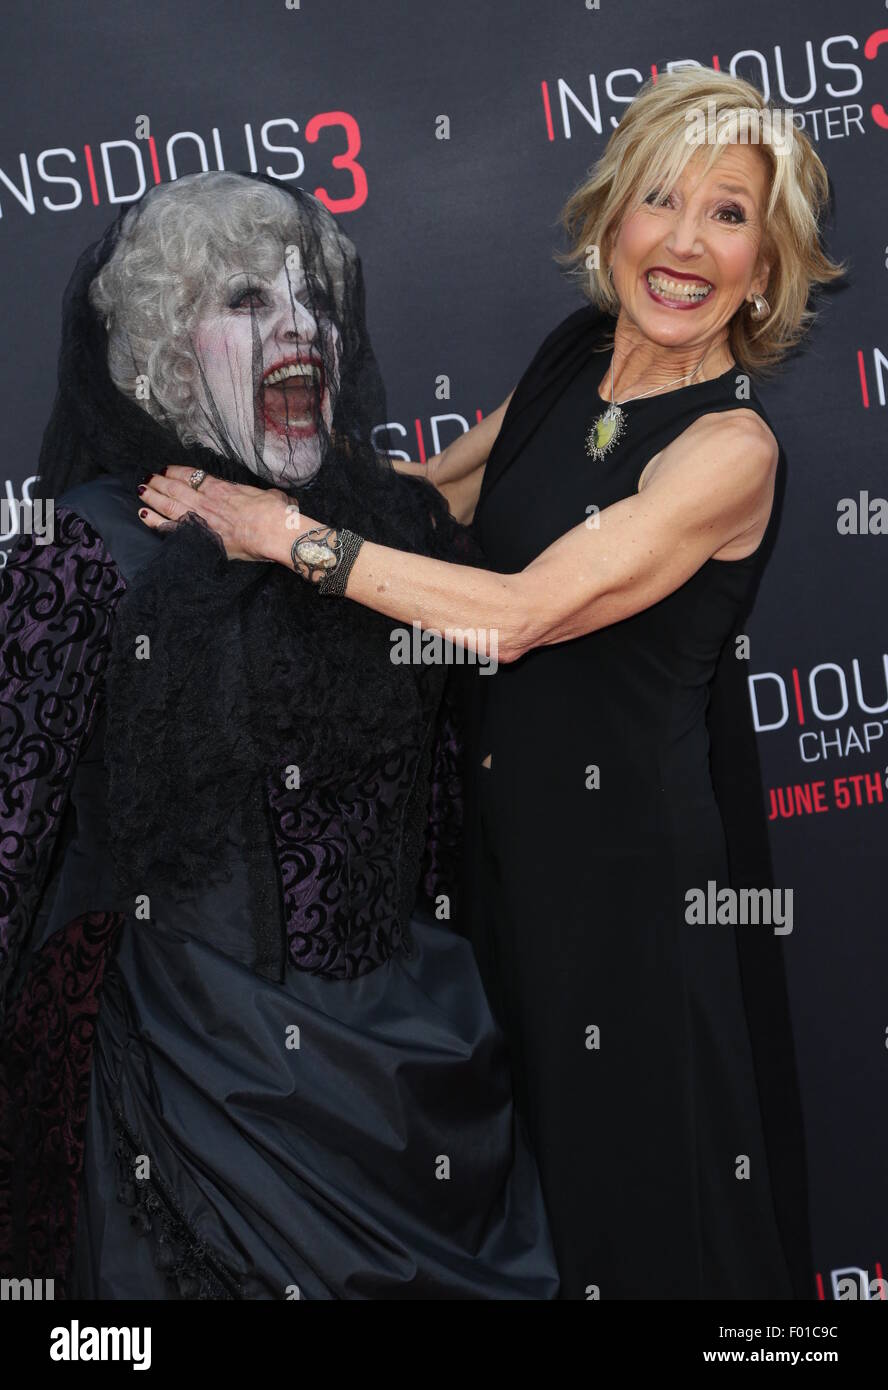 Screening of 'Insidious: Chapter 3' held at TCL Chinese Theatre - Arrivals  Featuring: Lin Shaye Where: Los Angeles, California, United States When: 04 Jun 2015 Stock Photo